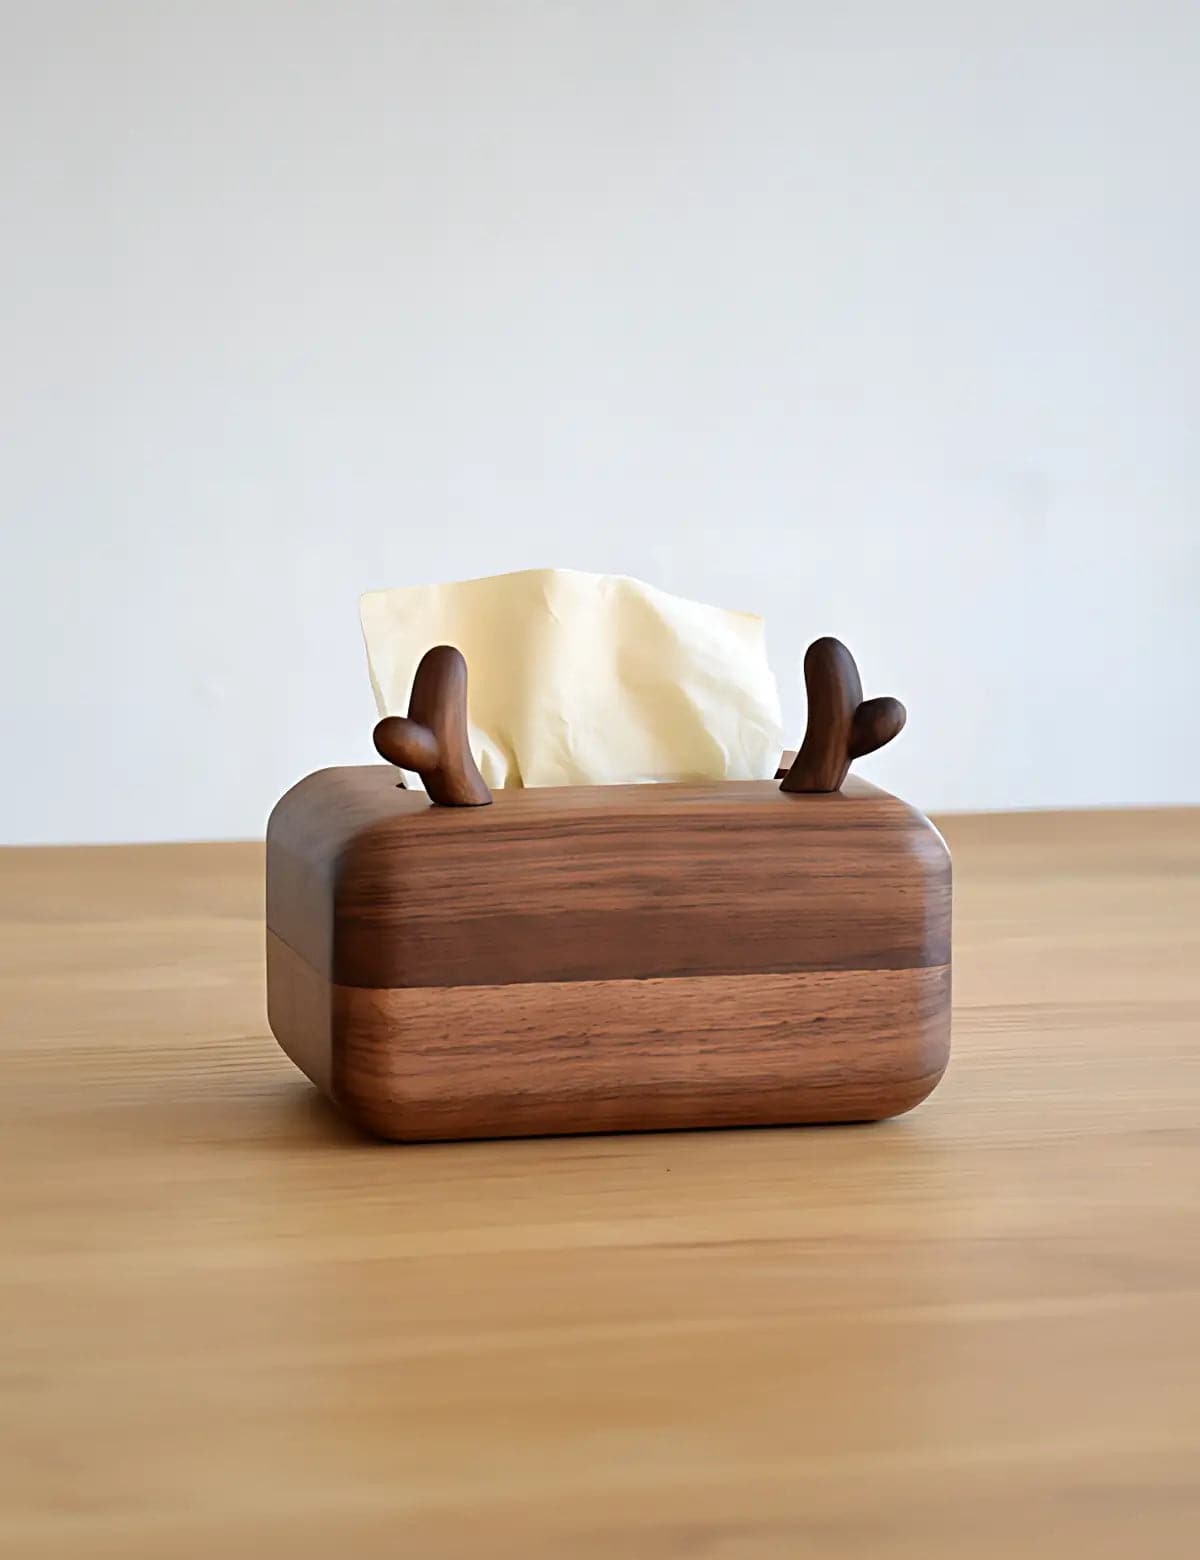 Wooden-Deer-Antler-Tissue-Box-Decorative-Home-Accessory-03